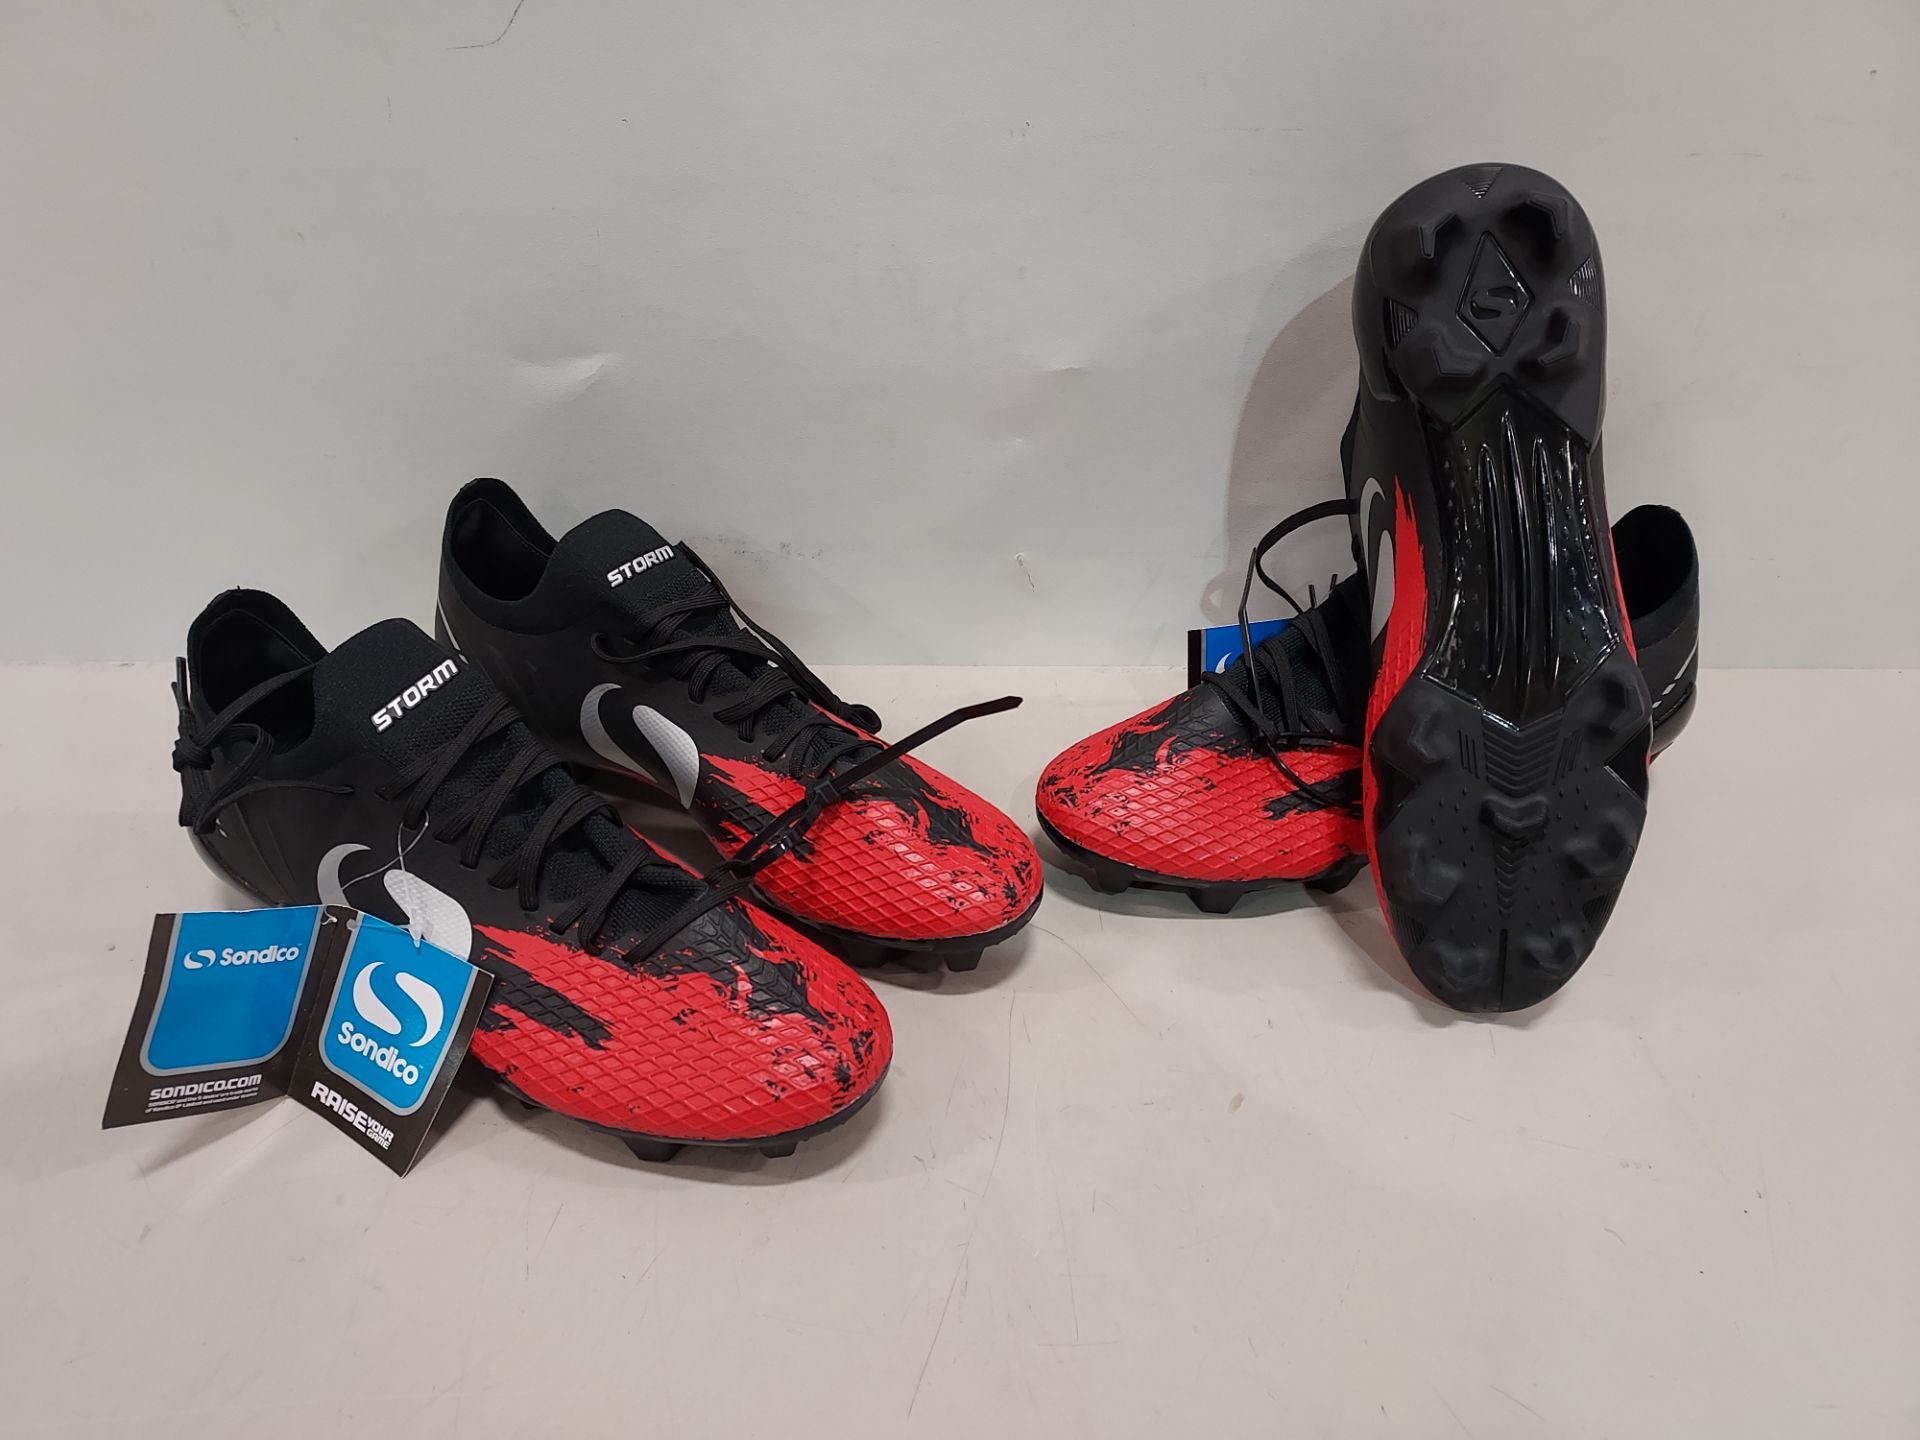 14 X BRAND NEW SONDICO STORM FOOTBALL BOOTS IN BLACK AND RED SIZE 7